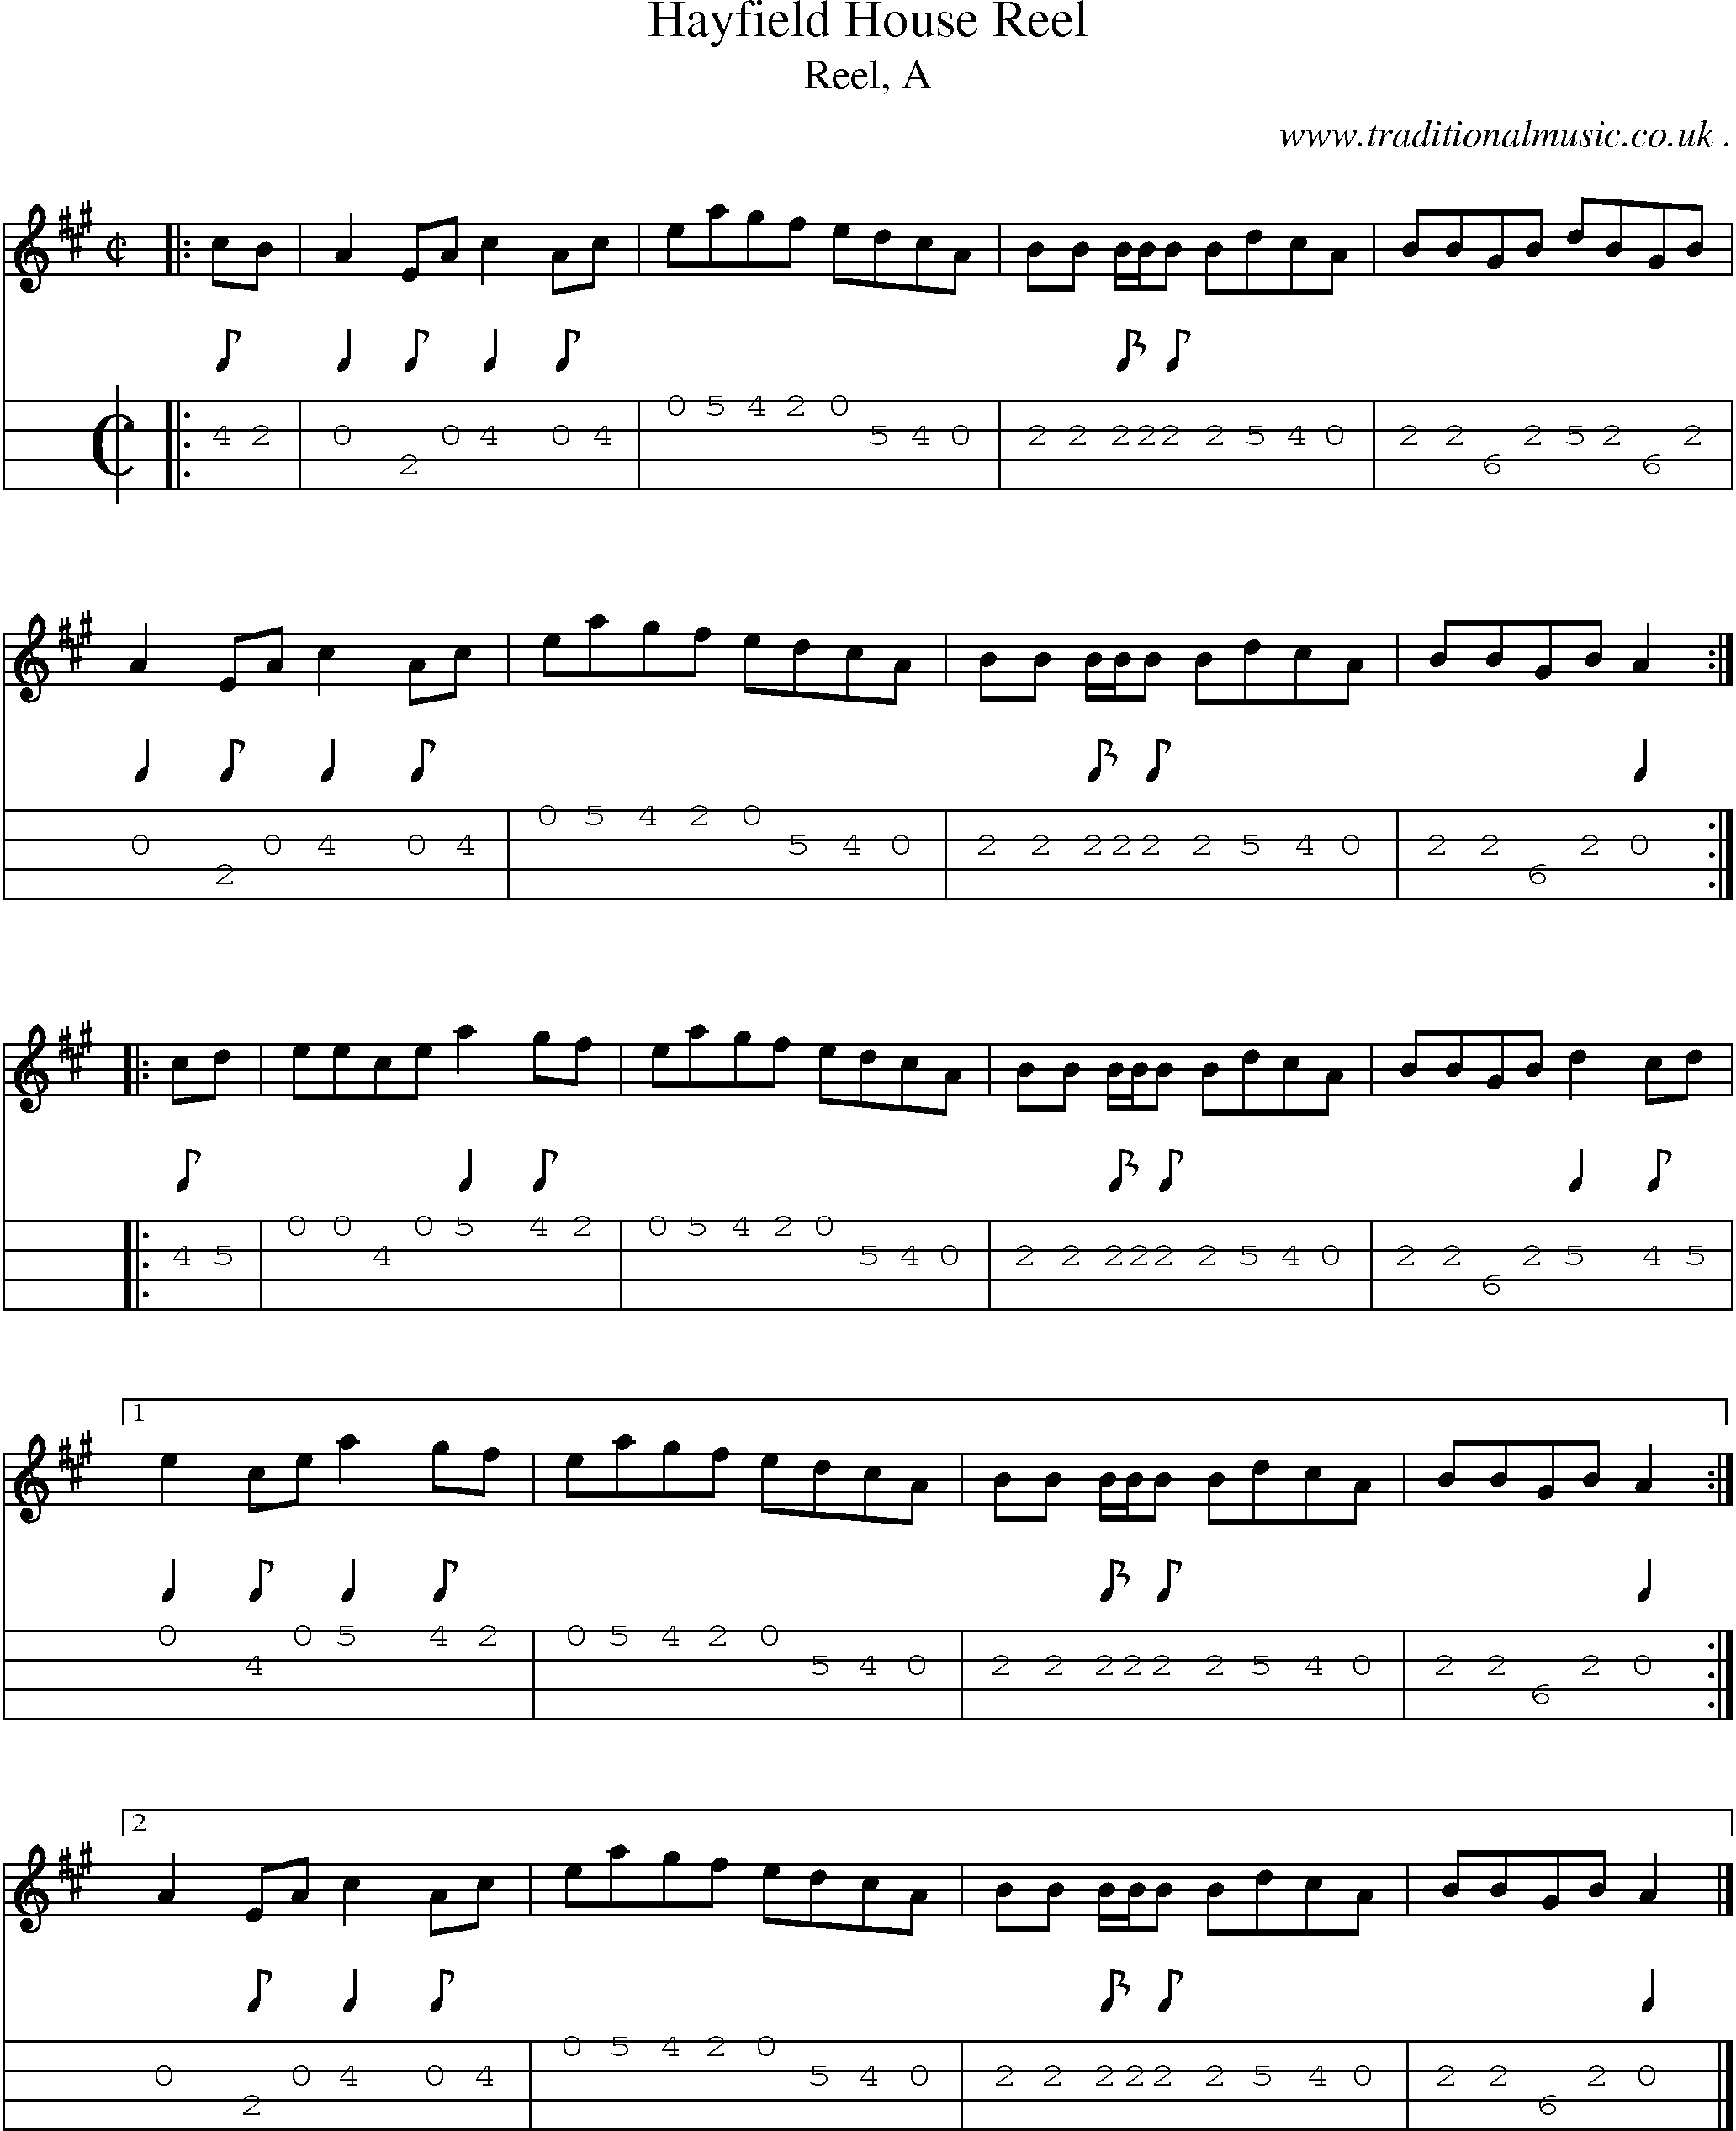 Sheet-music  score, Chords and Mandolin Tabs for Hayfield House Reel